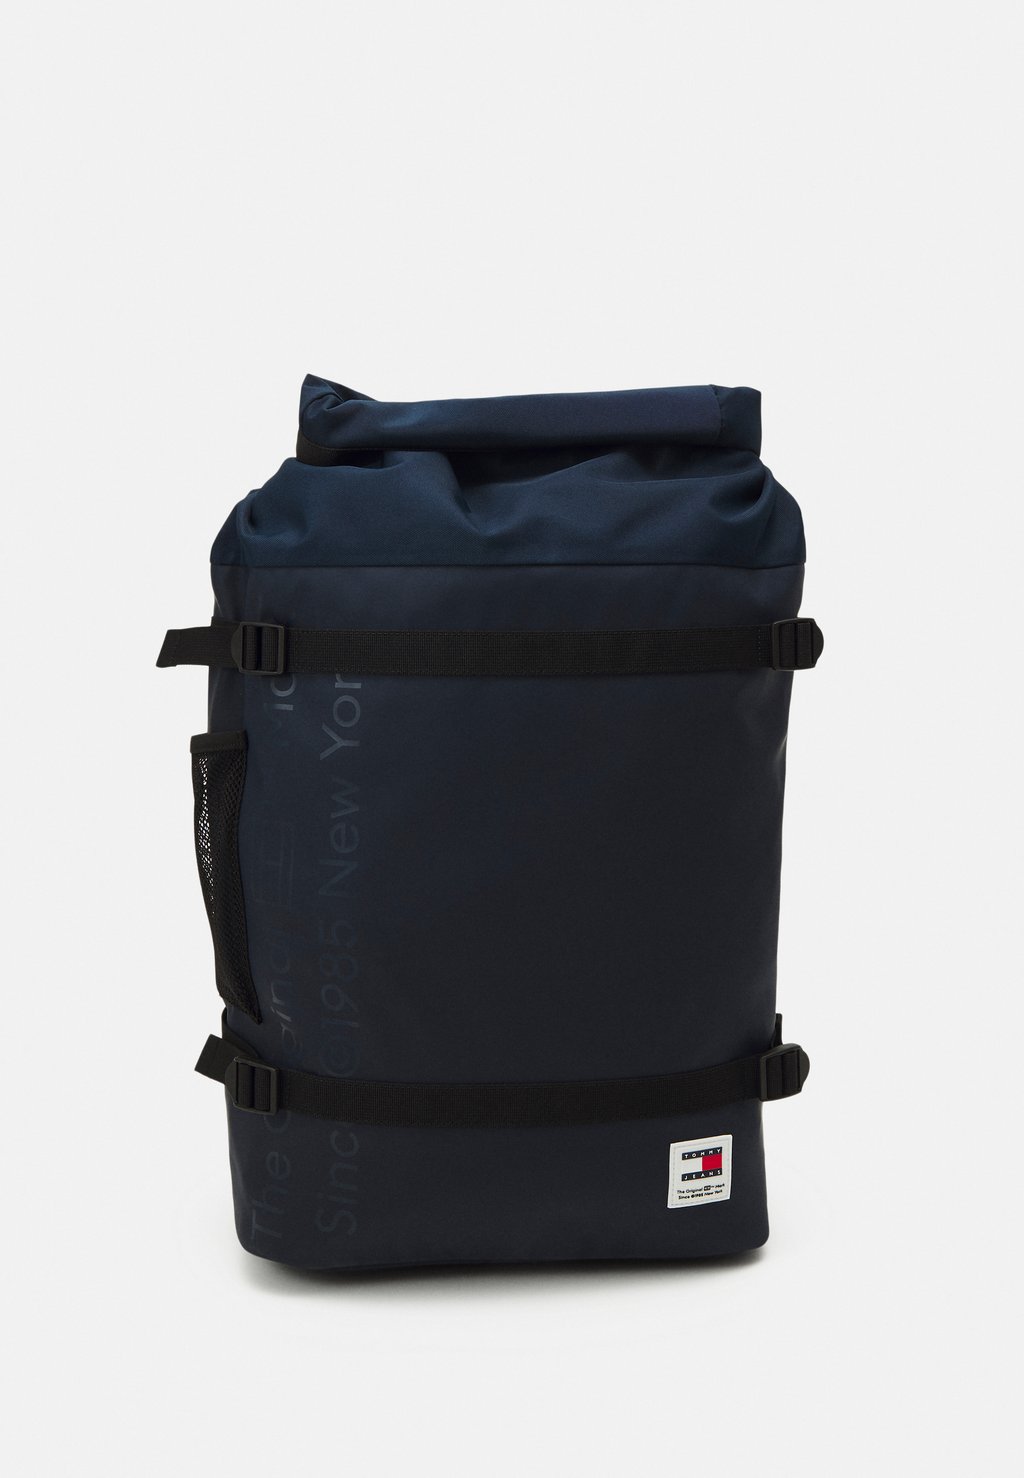 Рюкзак DAILY ROLLTOP BACKPACK Tommy Jeans, цвет dark night navy